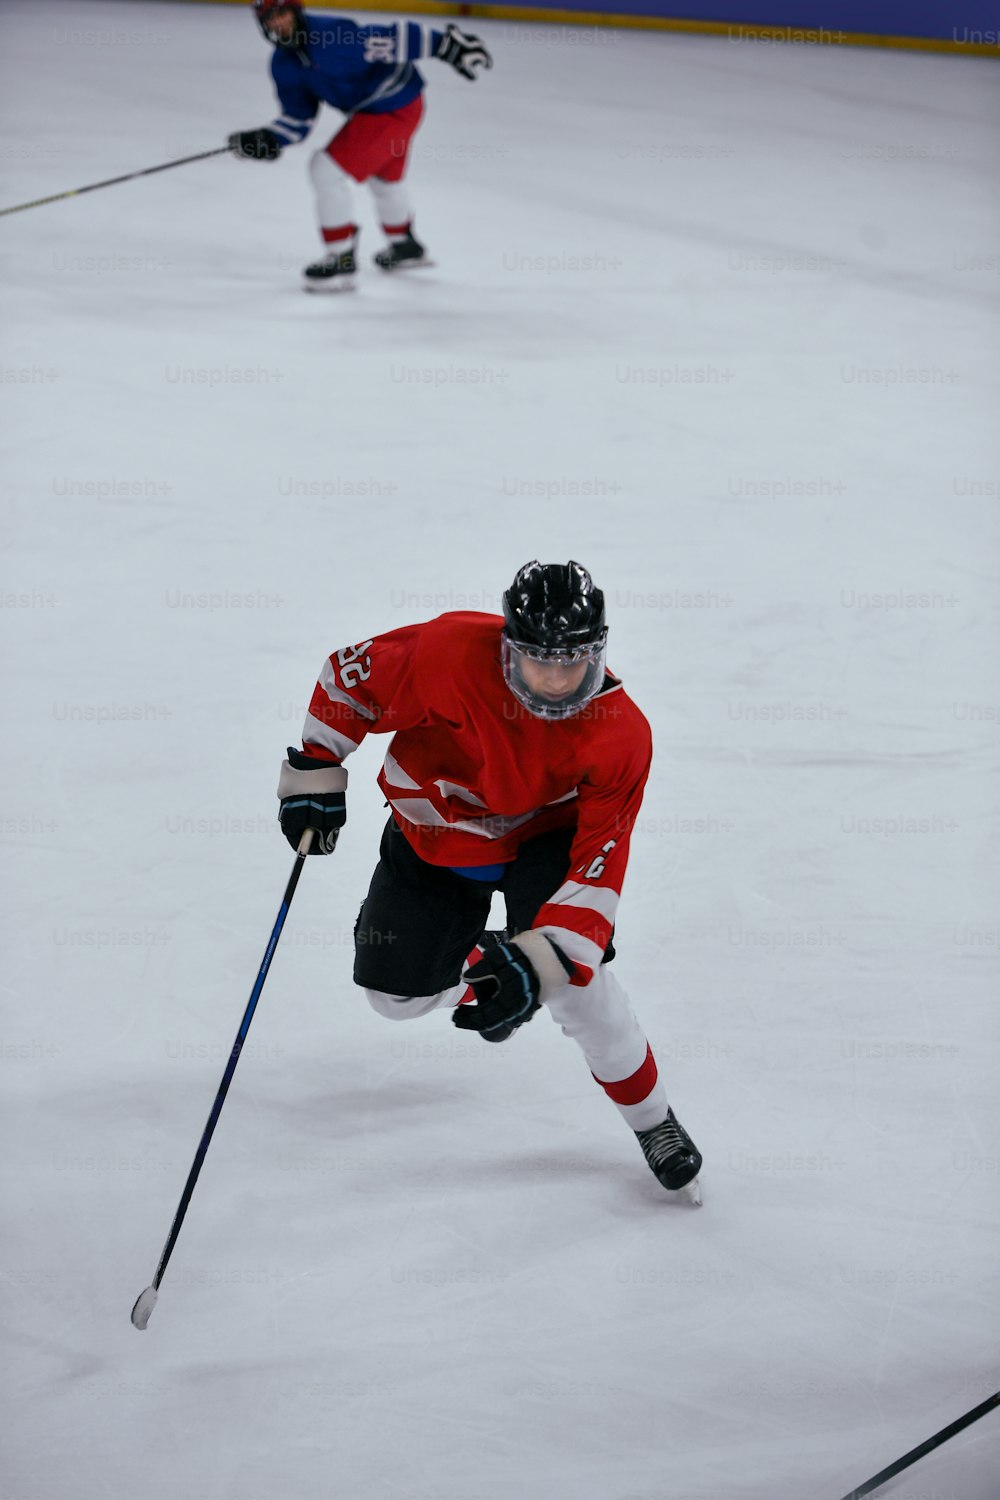 a man in a red jersey skating on an ice rink